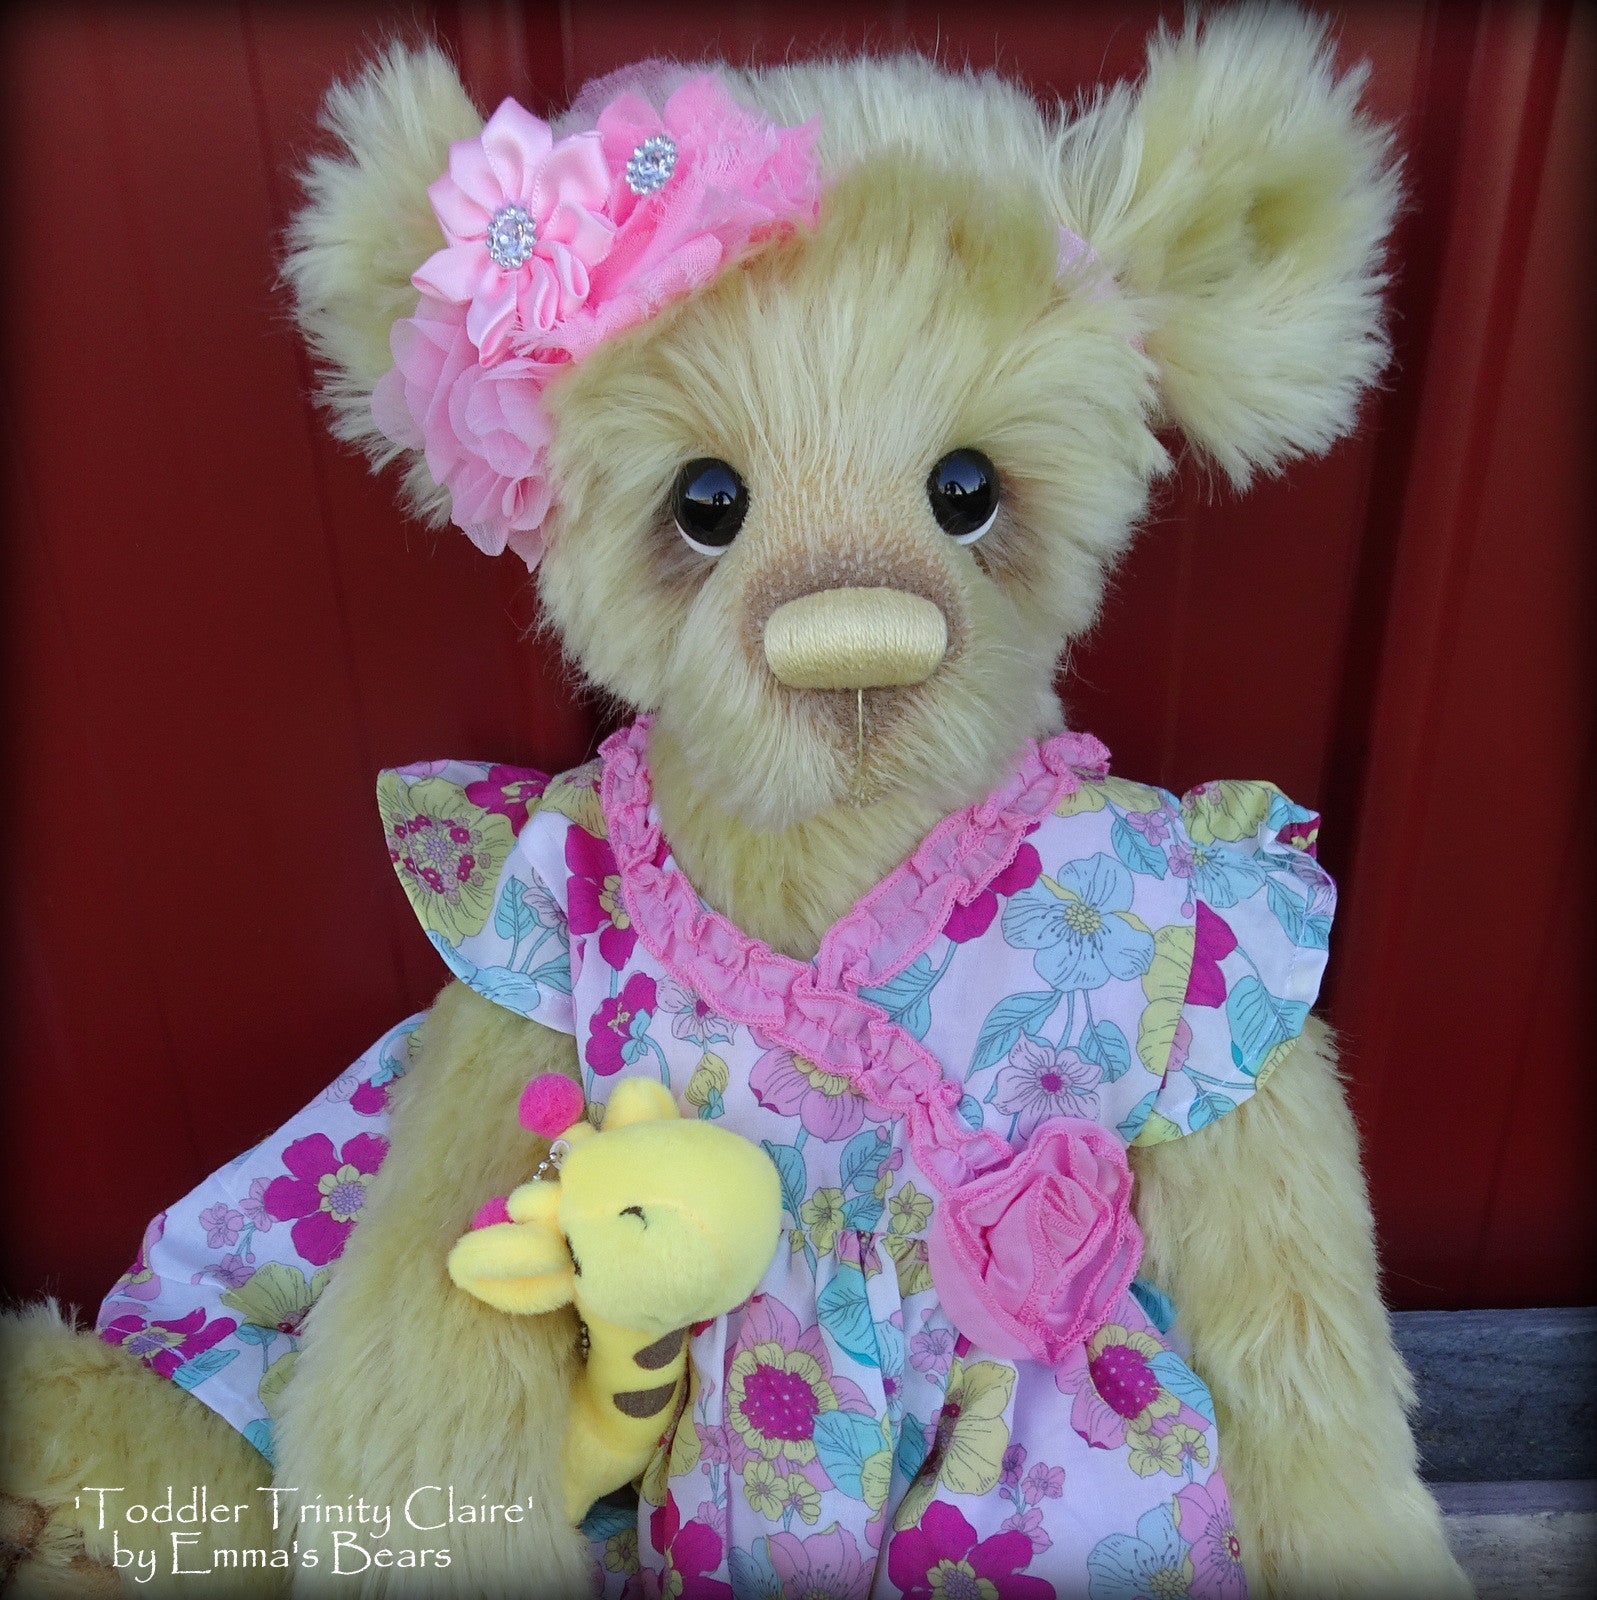 Toddler Trinity Claire - 20in MOHAIR Artist toddler style Bear by Emmas Bears - OOAK